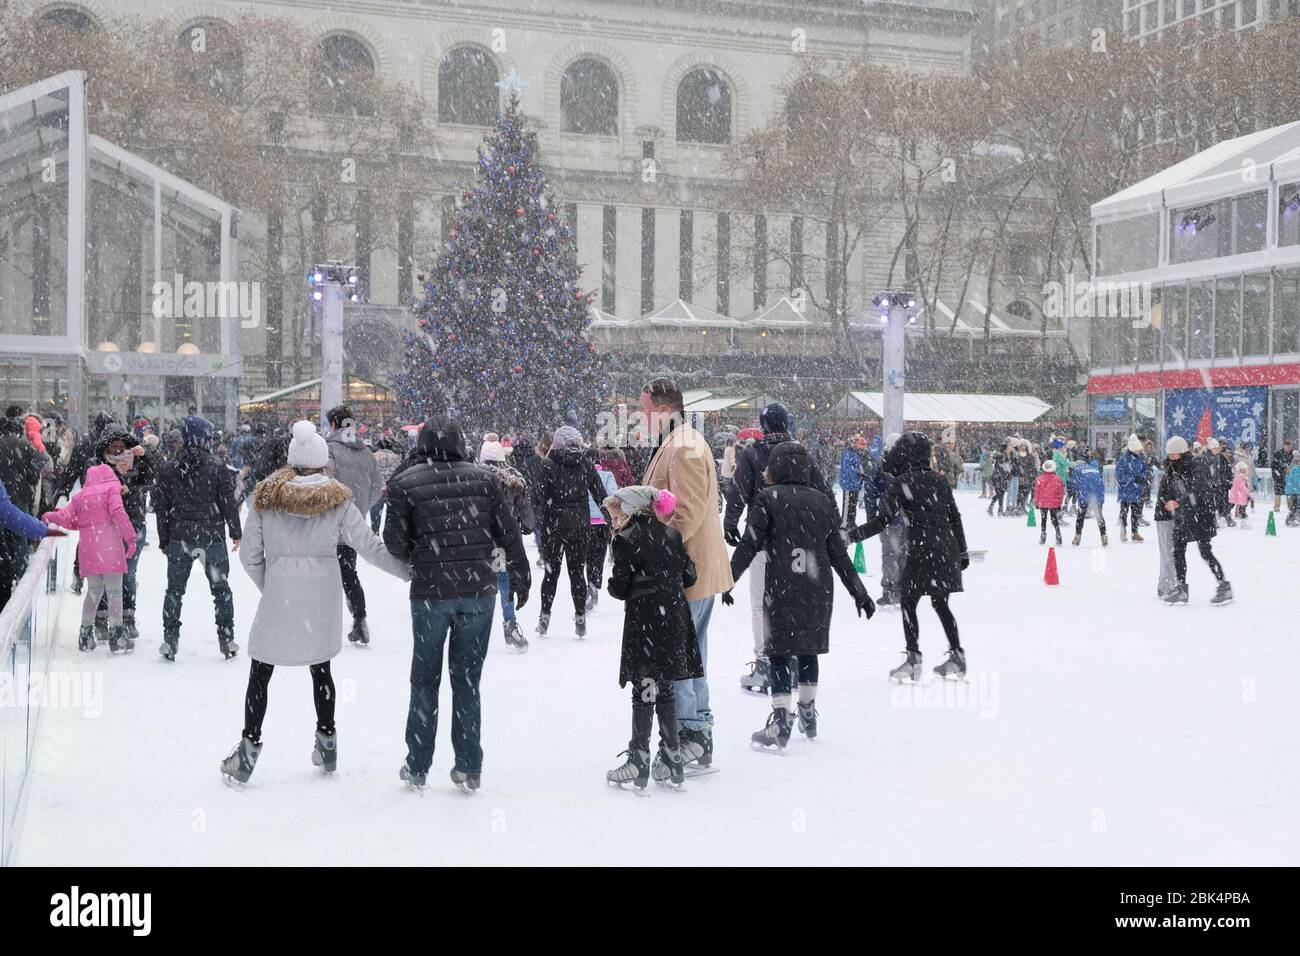 New York, NY/USA- December 2017: The ice rink at the Winter Village at Bryant Park gets very busy during the winter months. Families enjoy themselves Stock Photo